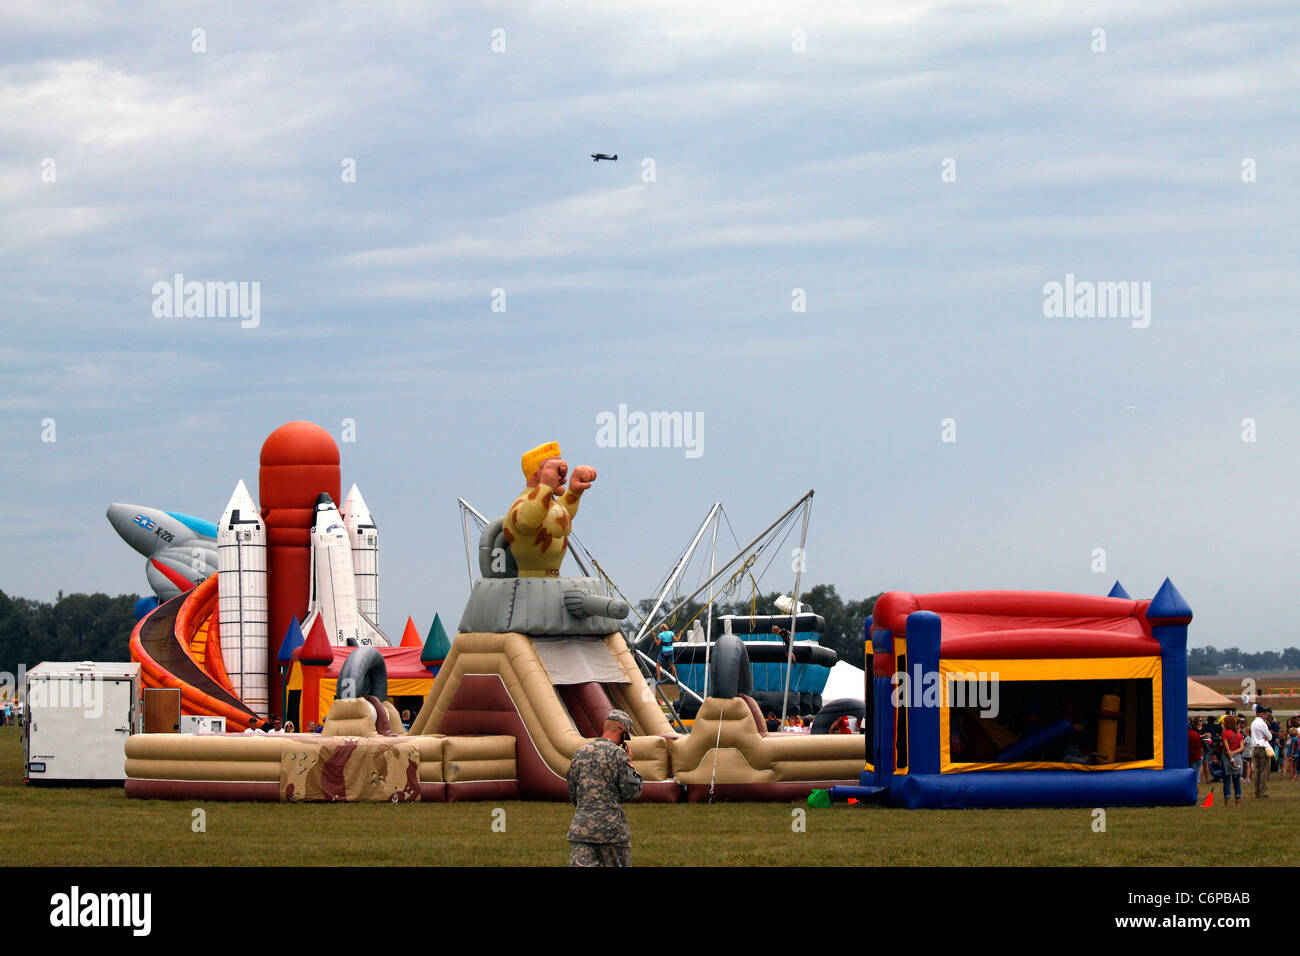 Bouncy world amusements for children at event Stock Photo